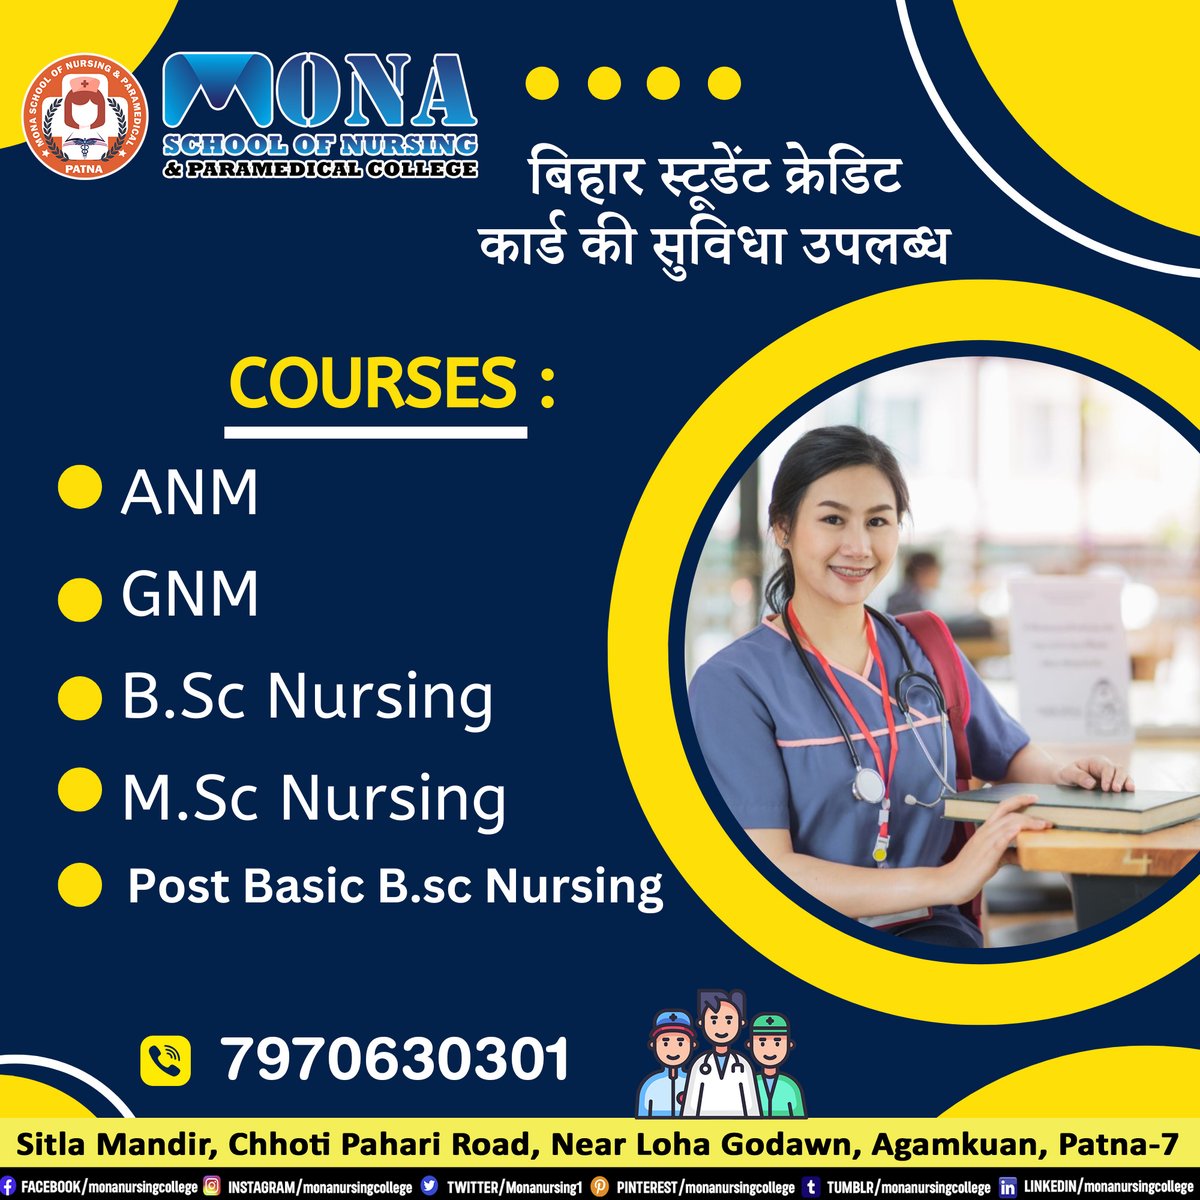 GNM Nursing In Patna
📷 ADMISSION OPEN 📷
BSC Nursing
ANM Nursing
GNM Nursing
Post Basic BSC Nursing
Professional courses.
#admissionsopen2023_24 #nursingsyllabus #NursingCourses #NursingInstitute #anmnursing #bscnursingdegree #GNMNursing